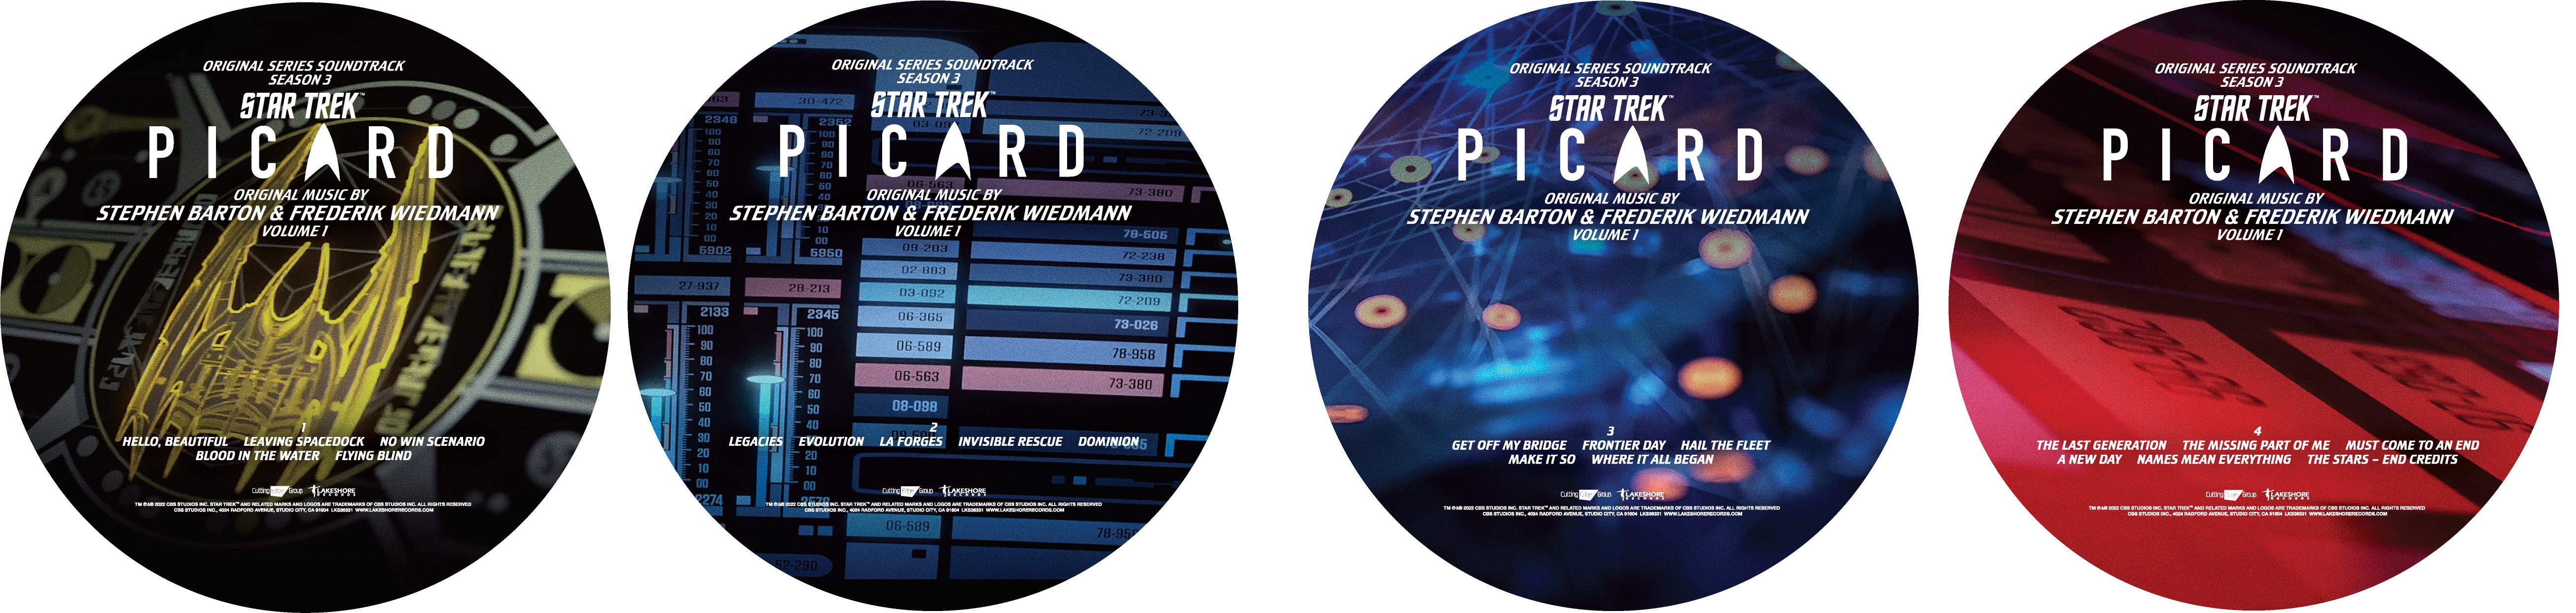 Star Trek: Picard Goes Retro With a Vinyl Release